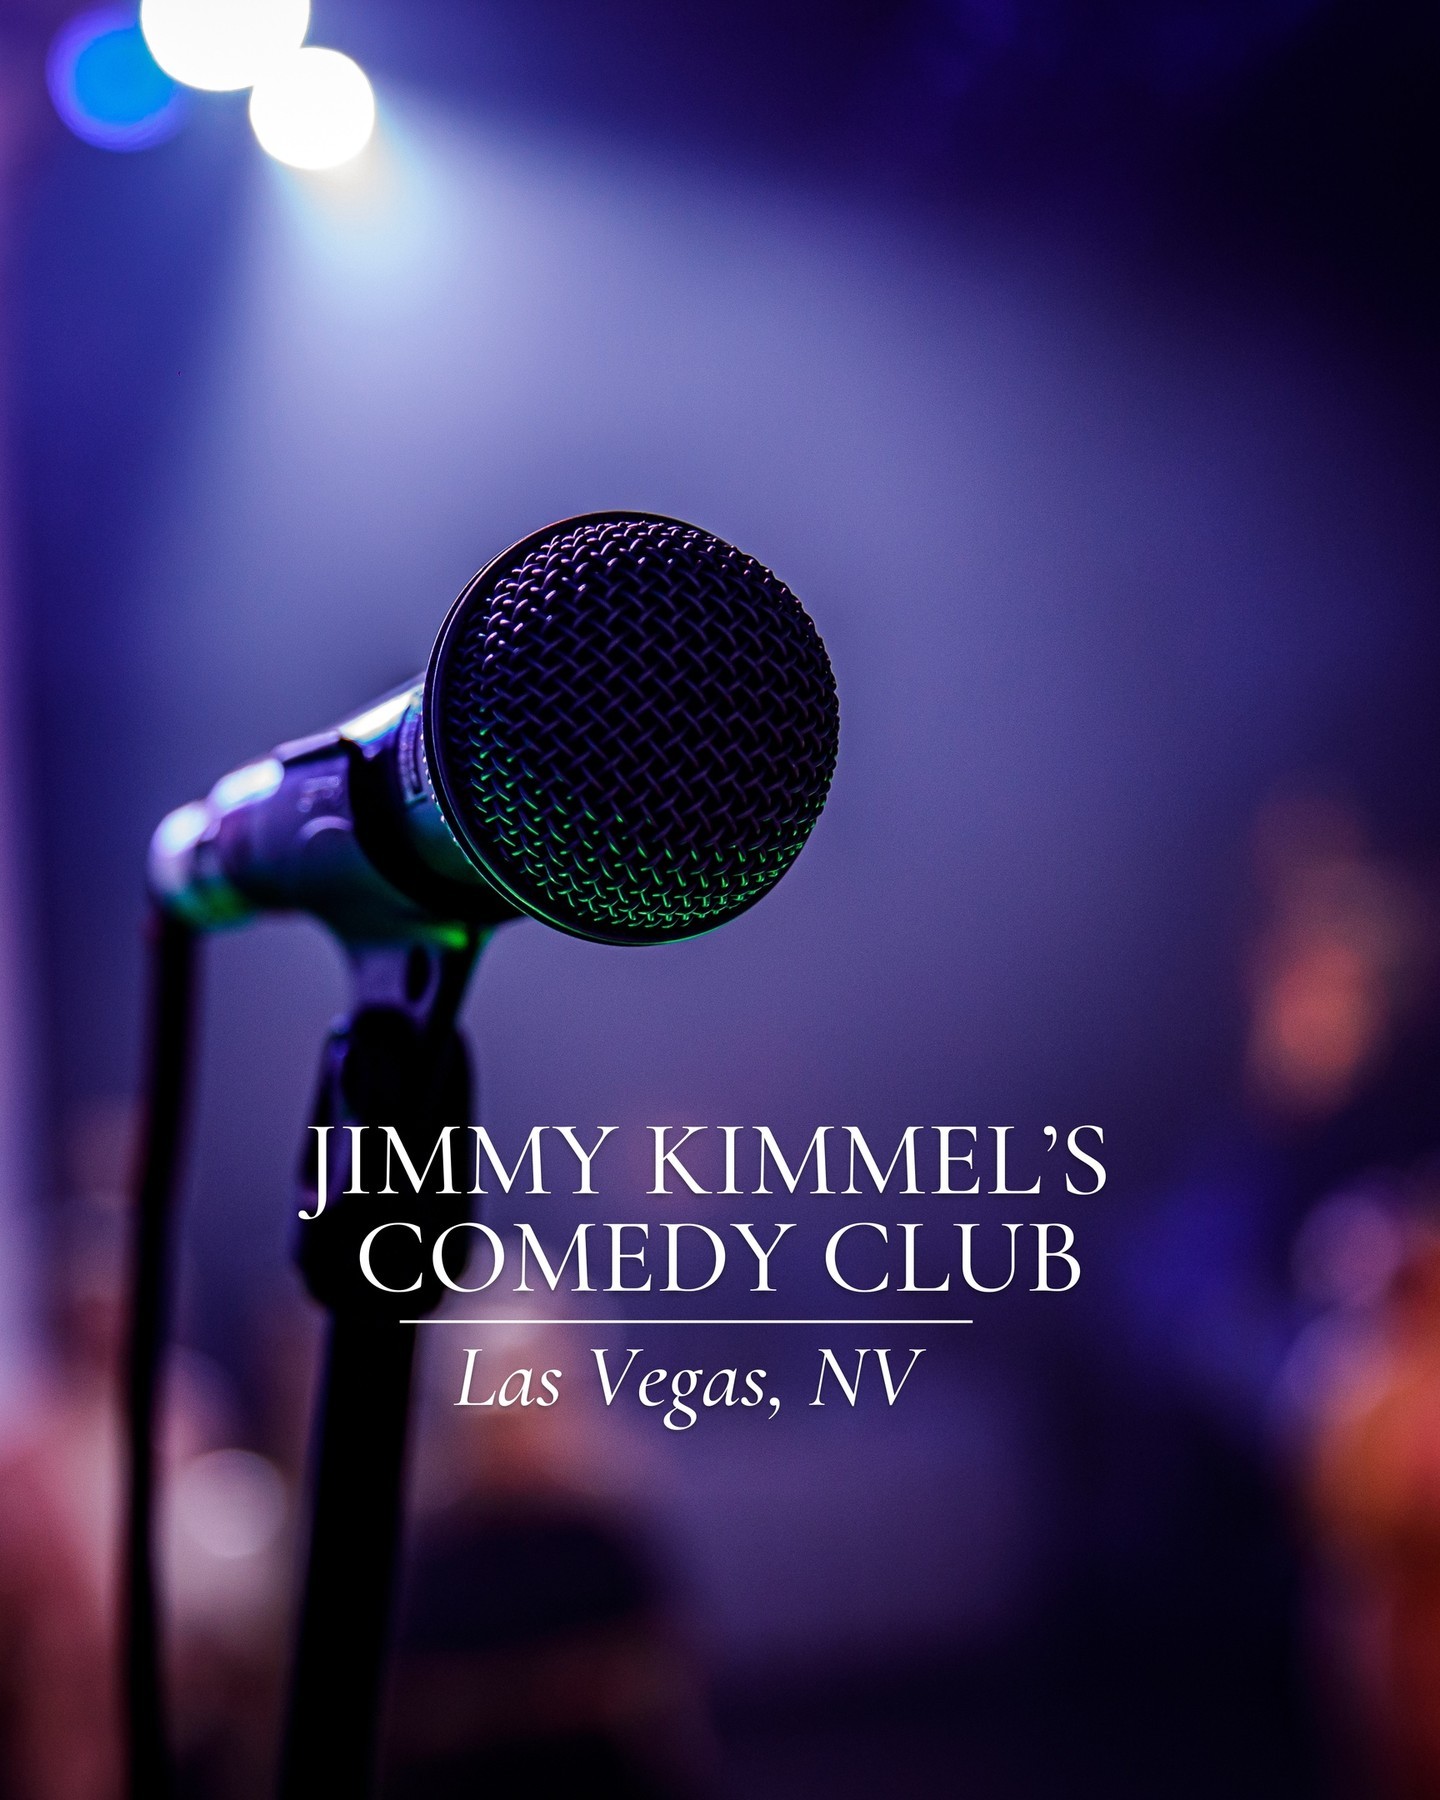 REOPENED IN LAS VEGAS: @kimmelscomedyclub 🎤 Late-night TV host Jimmy Kimmel reopened his stellar comedy club, Jimmy Kimmel’s Comedy Club, on Nov. 3. The hotspot is located in Kimmel’s hometown of Las Vegas and offers a lineup of comedians handpicked by the late-night host himself. The club features a high-end menu to be enjoyed before, during and after a show, with shareable bites, craft cocktails, inspired mocktails and a full kitchen. Read more using the link in our bio!